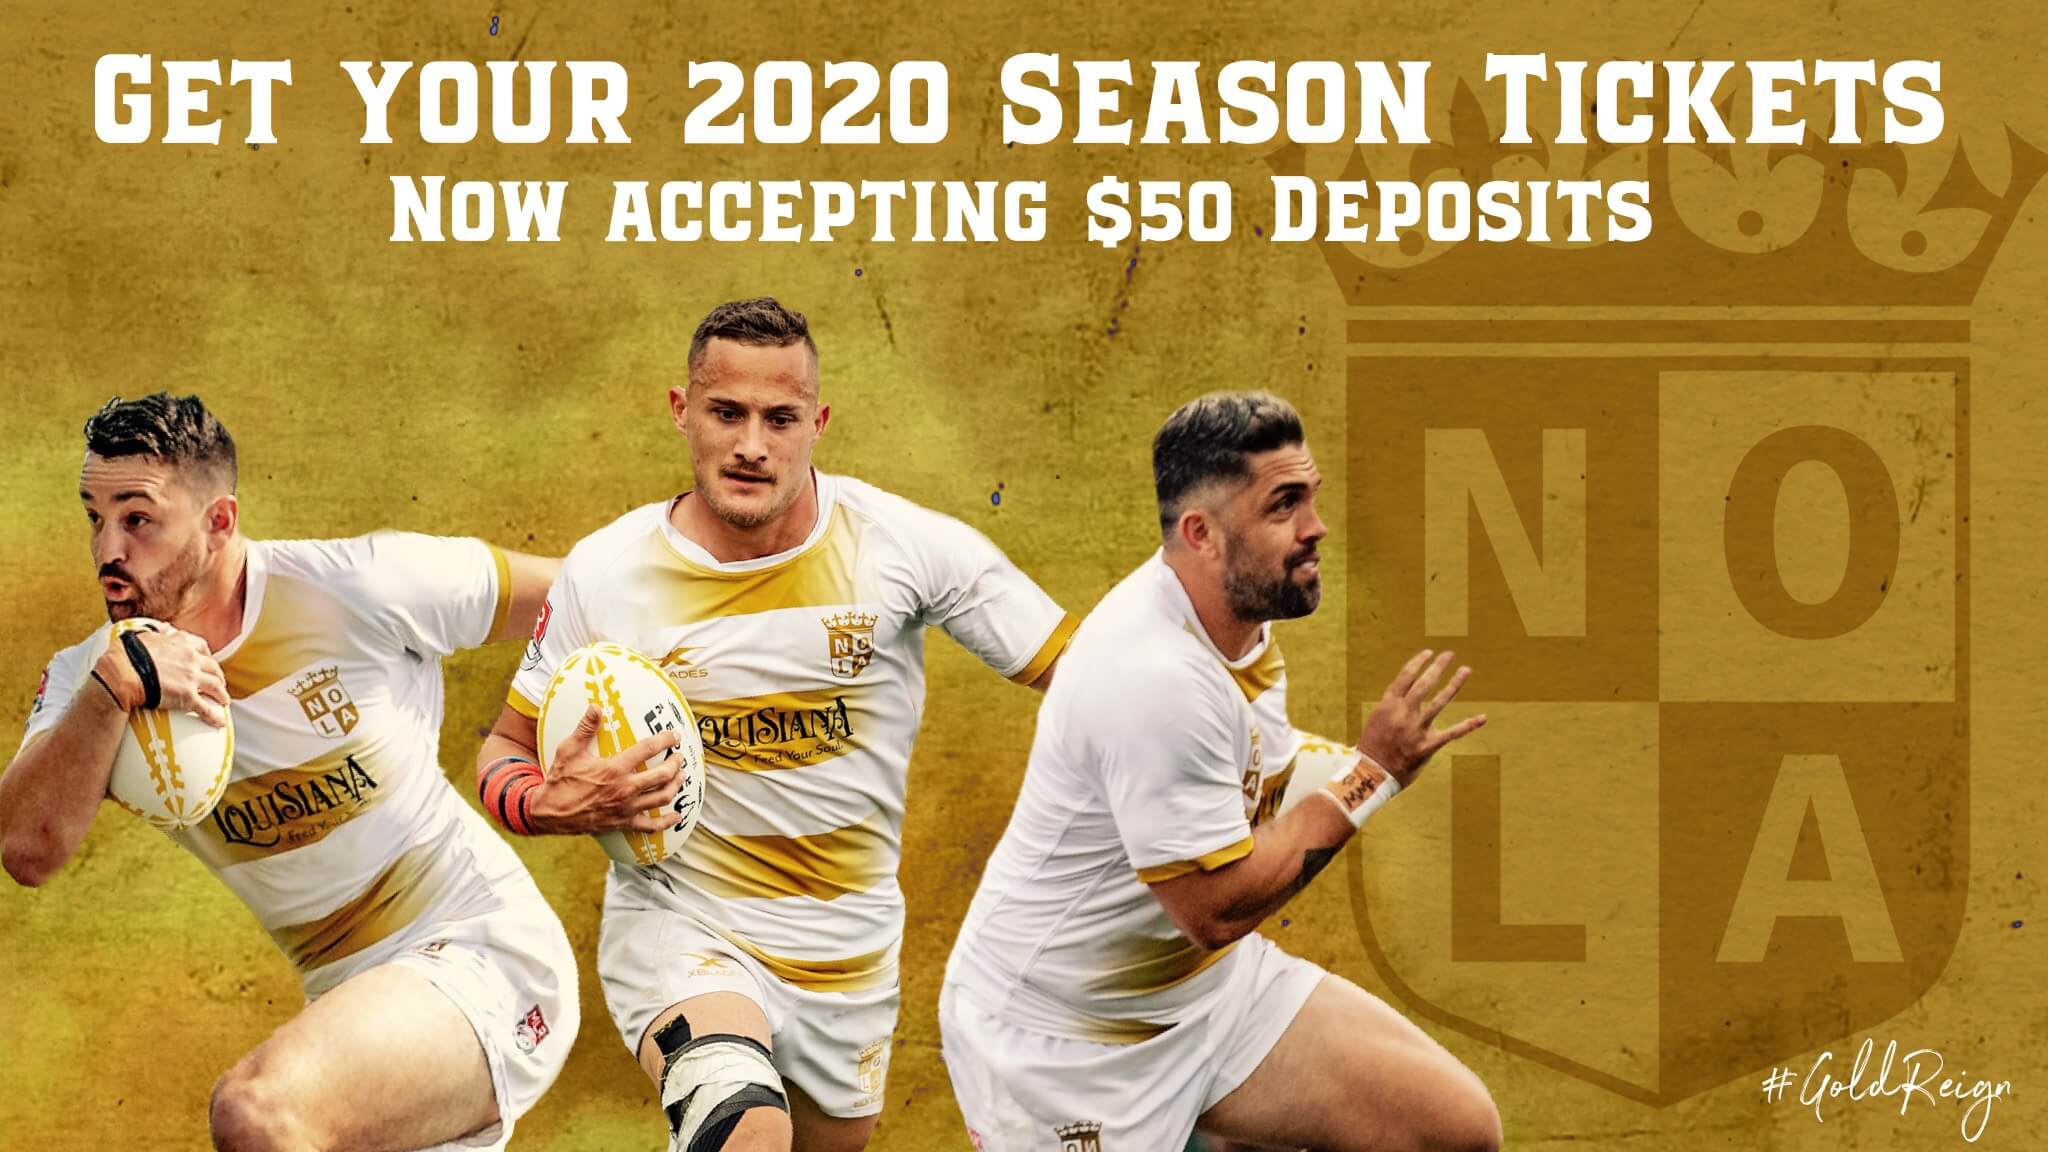 Season Ticket Deposits for 2020 are Available Now!